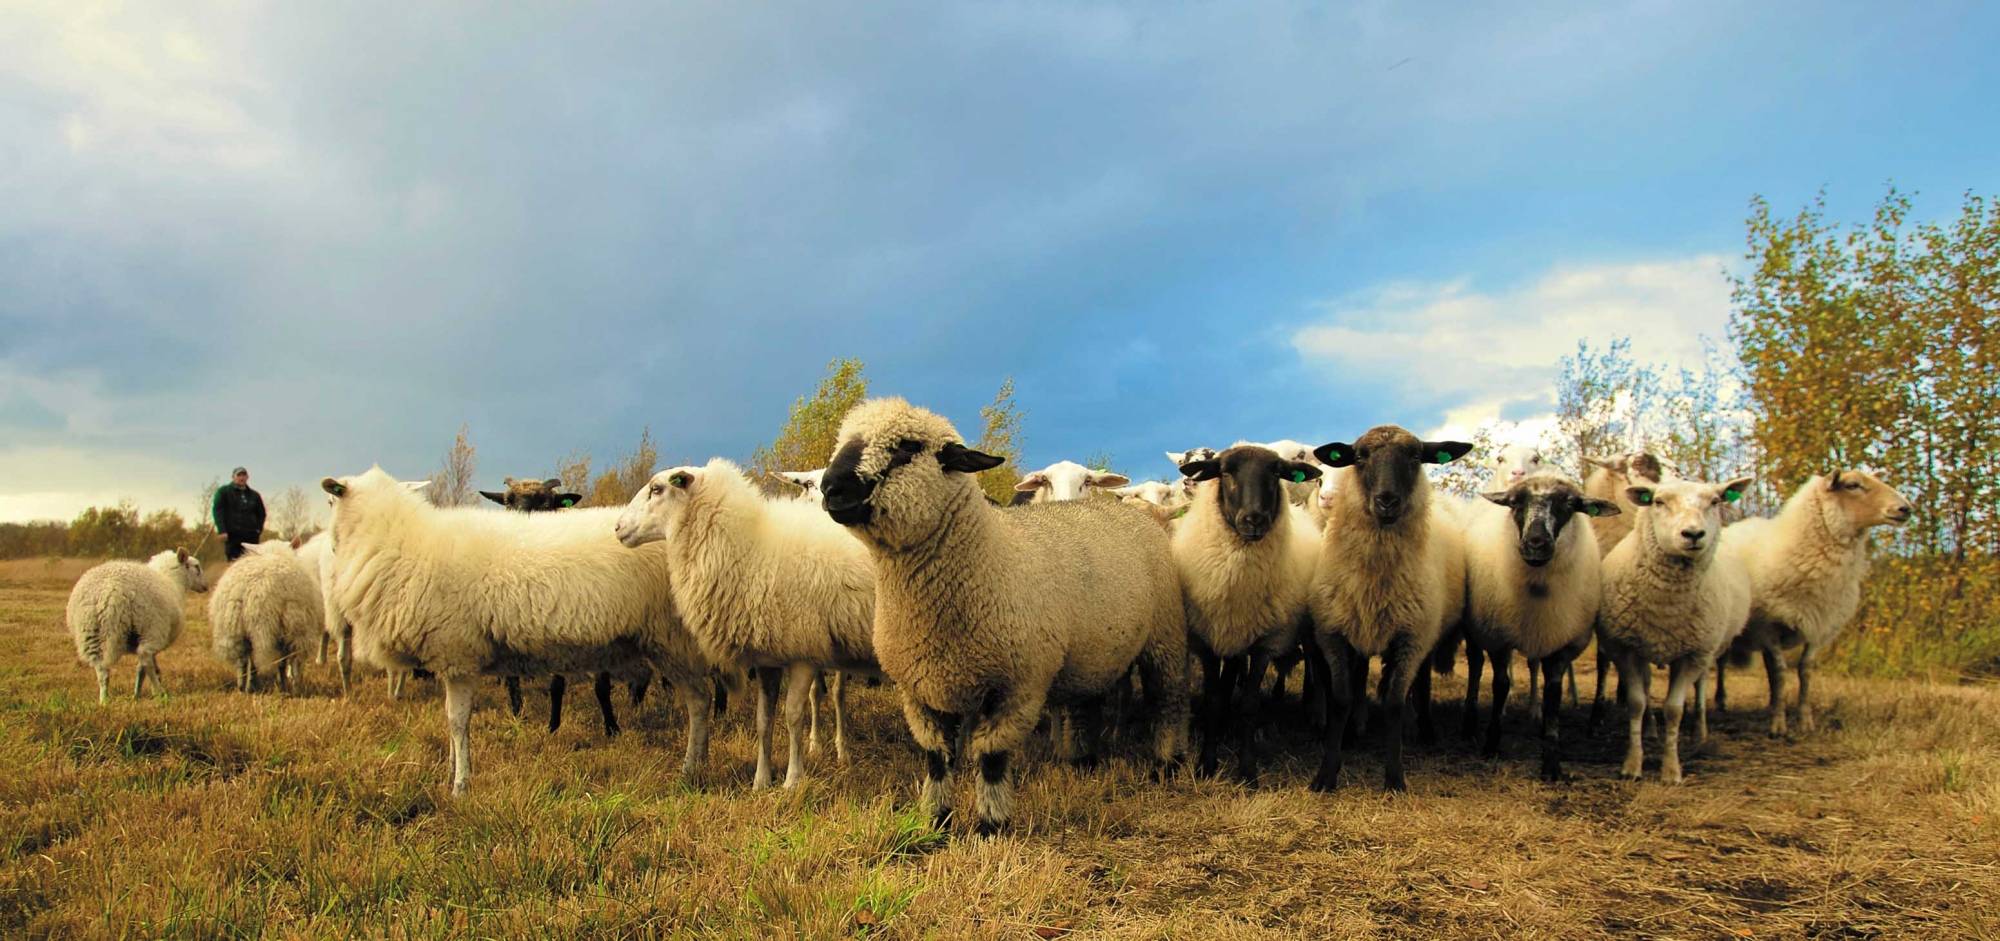 Flock of Sheep on Grass